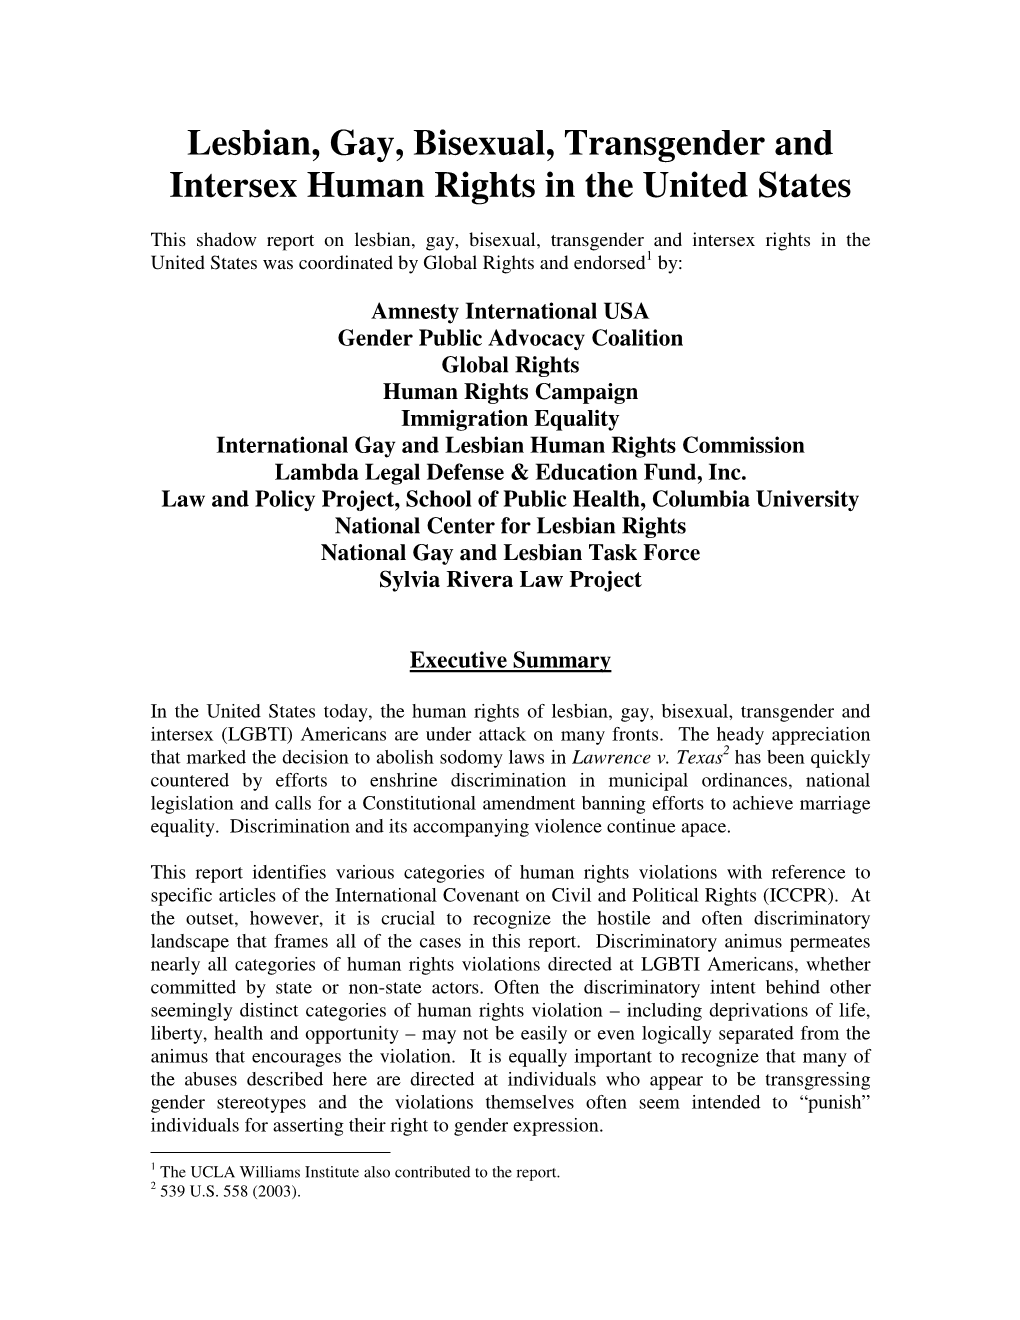 Lesbian, Gay, Bisexual, Transgender and Intersex Human Rights in the United States